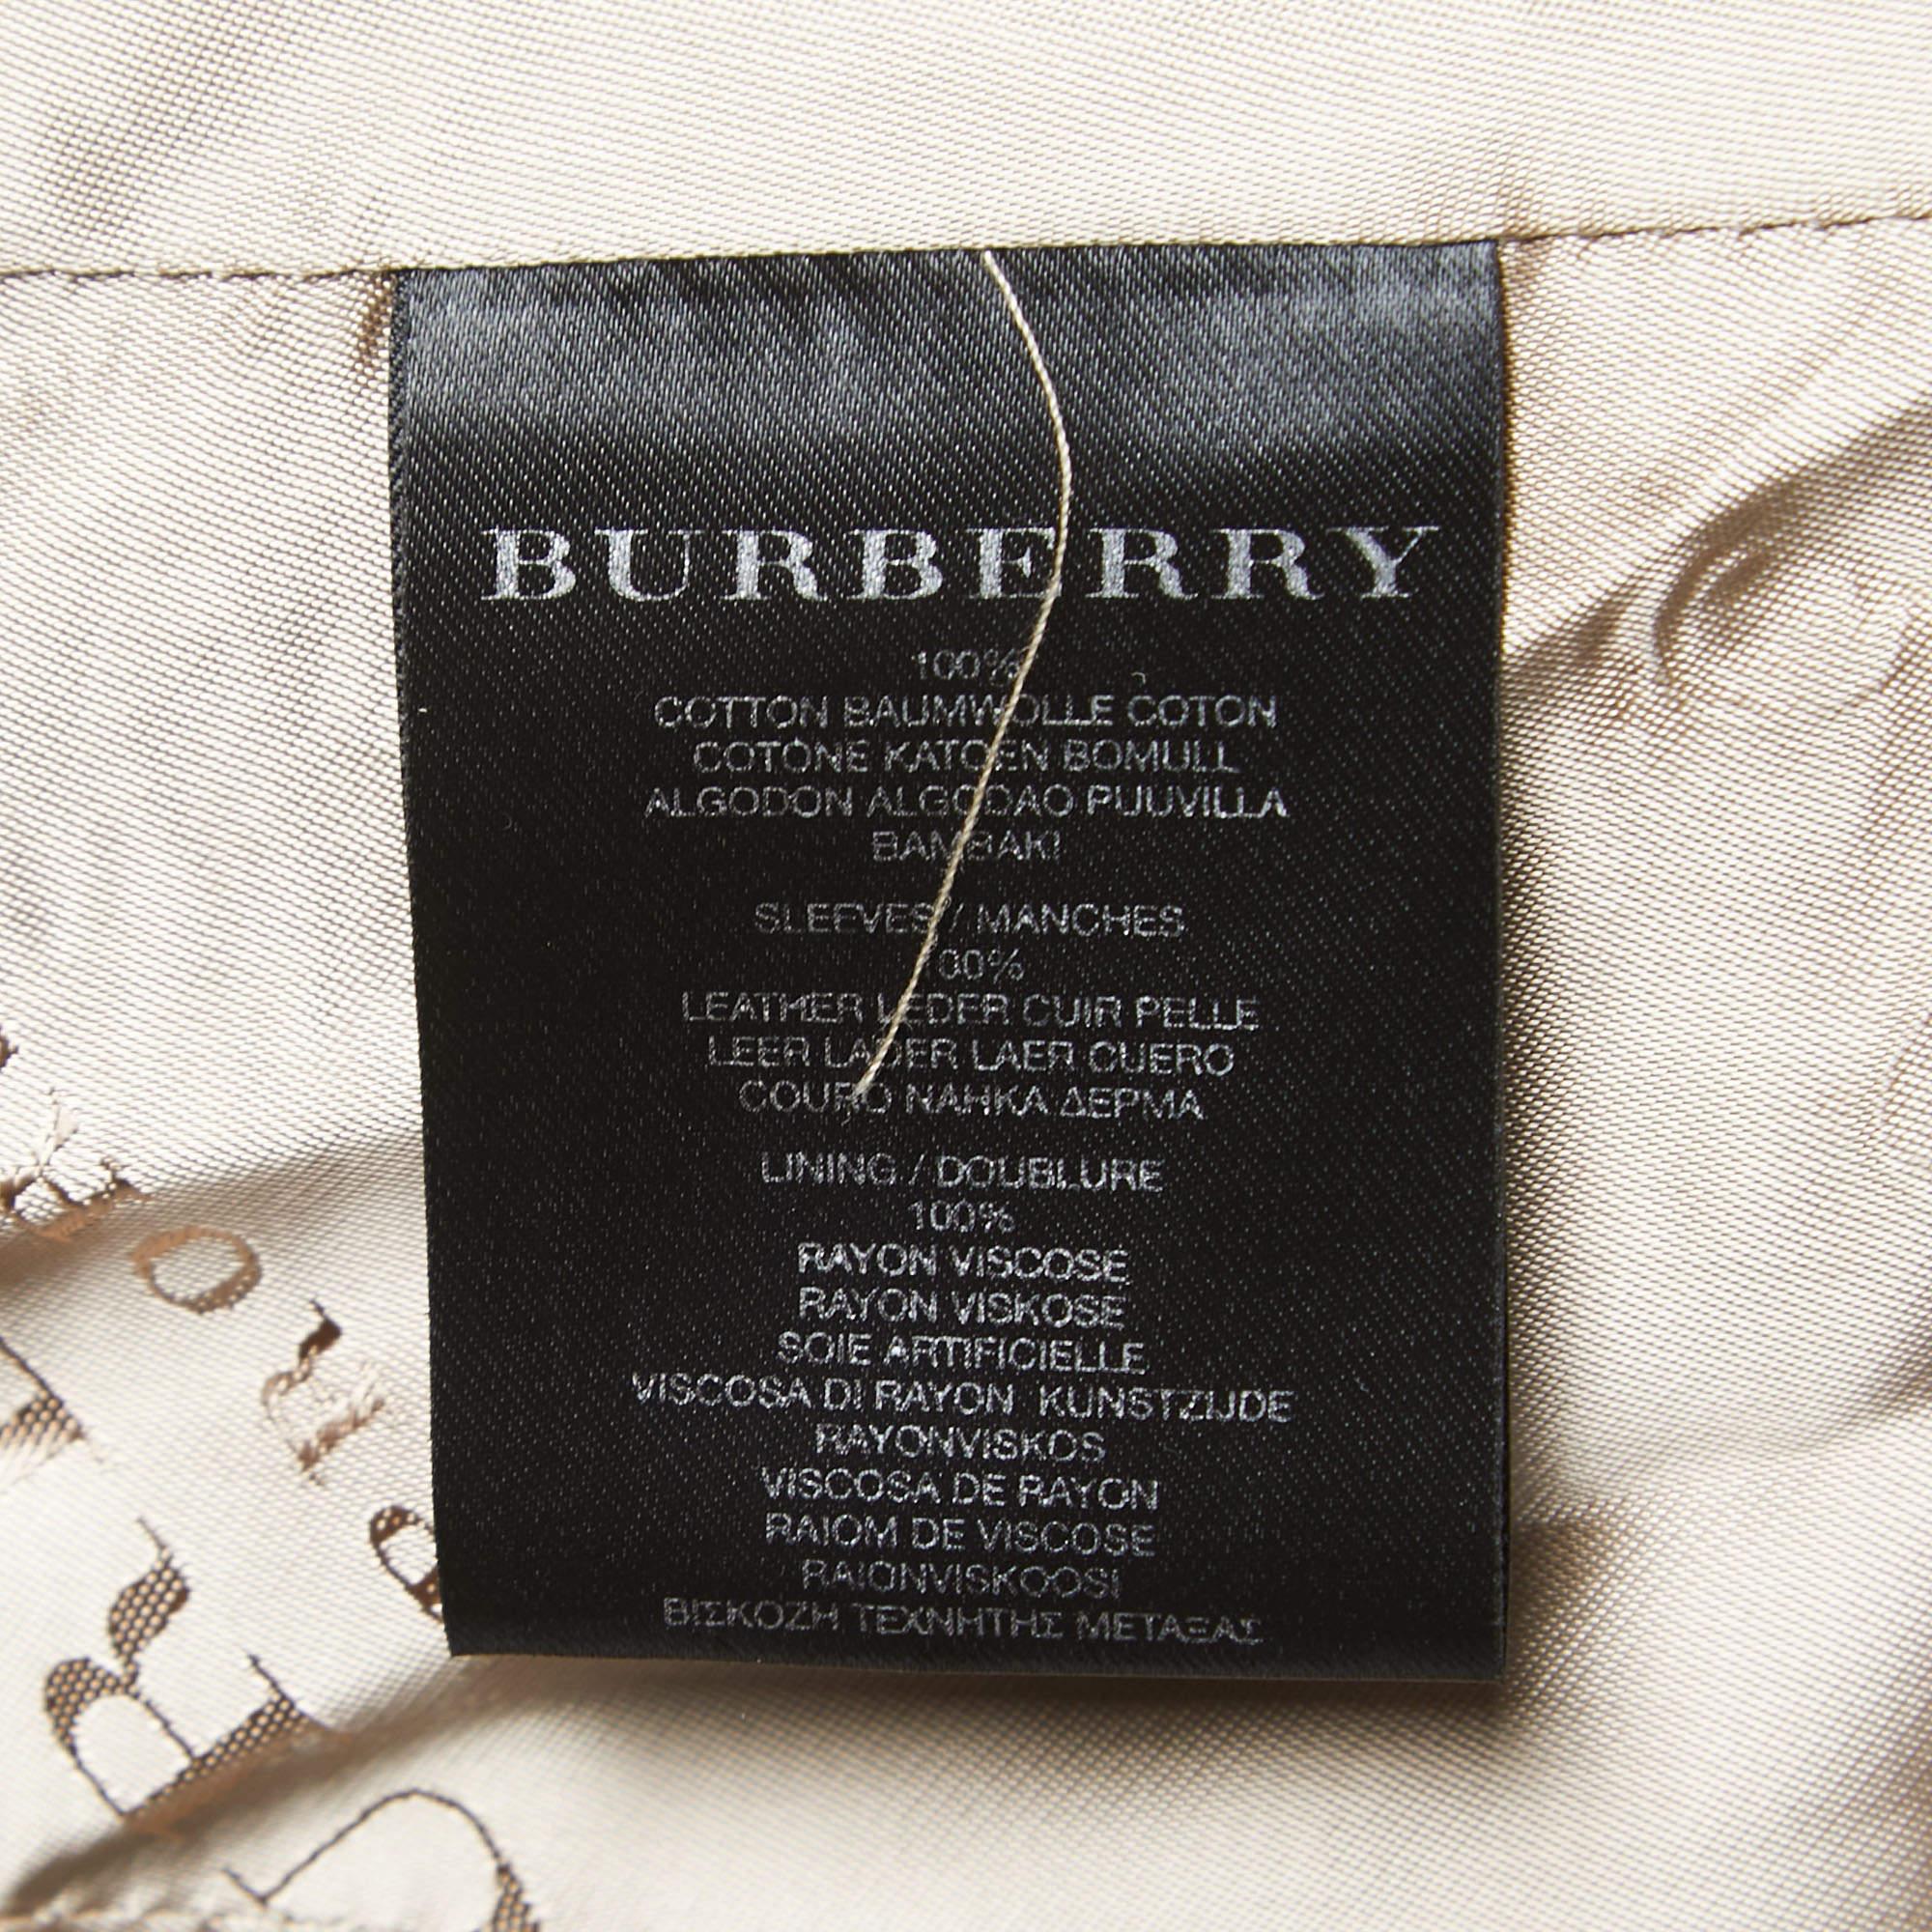 Burberry Prorsum Beige Cotton & Leather Belted Jacket  1